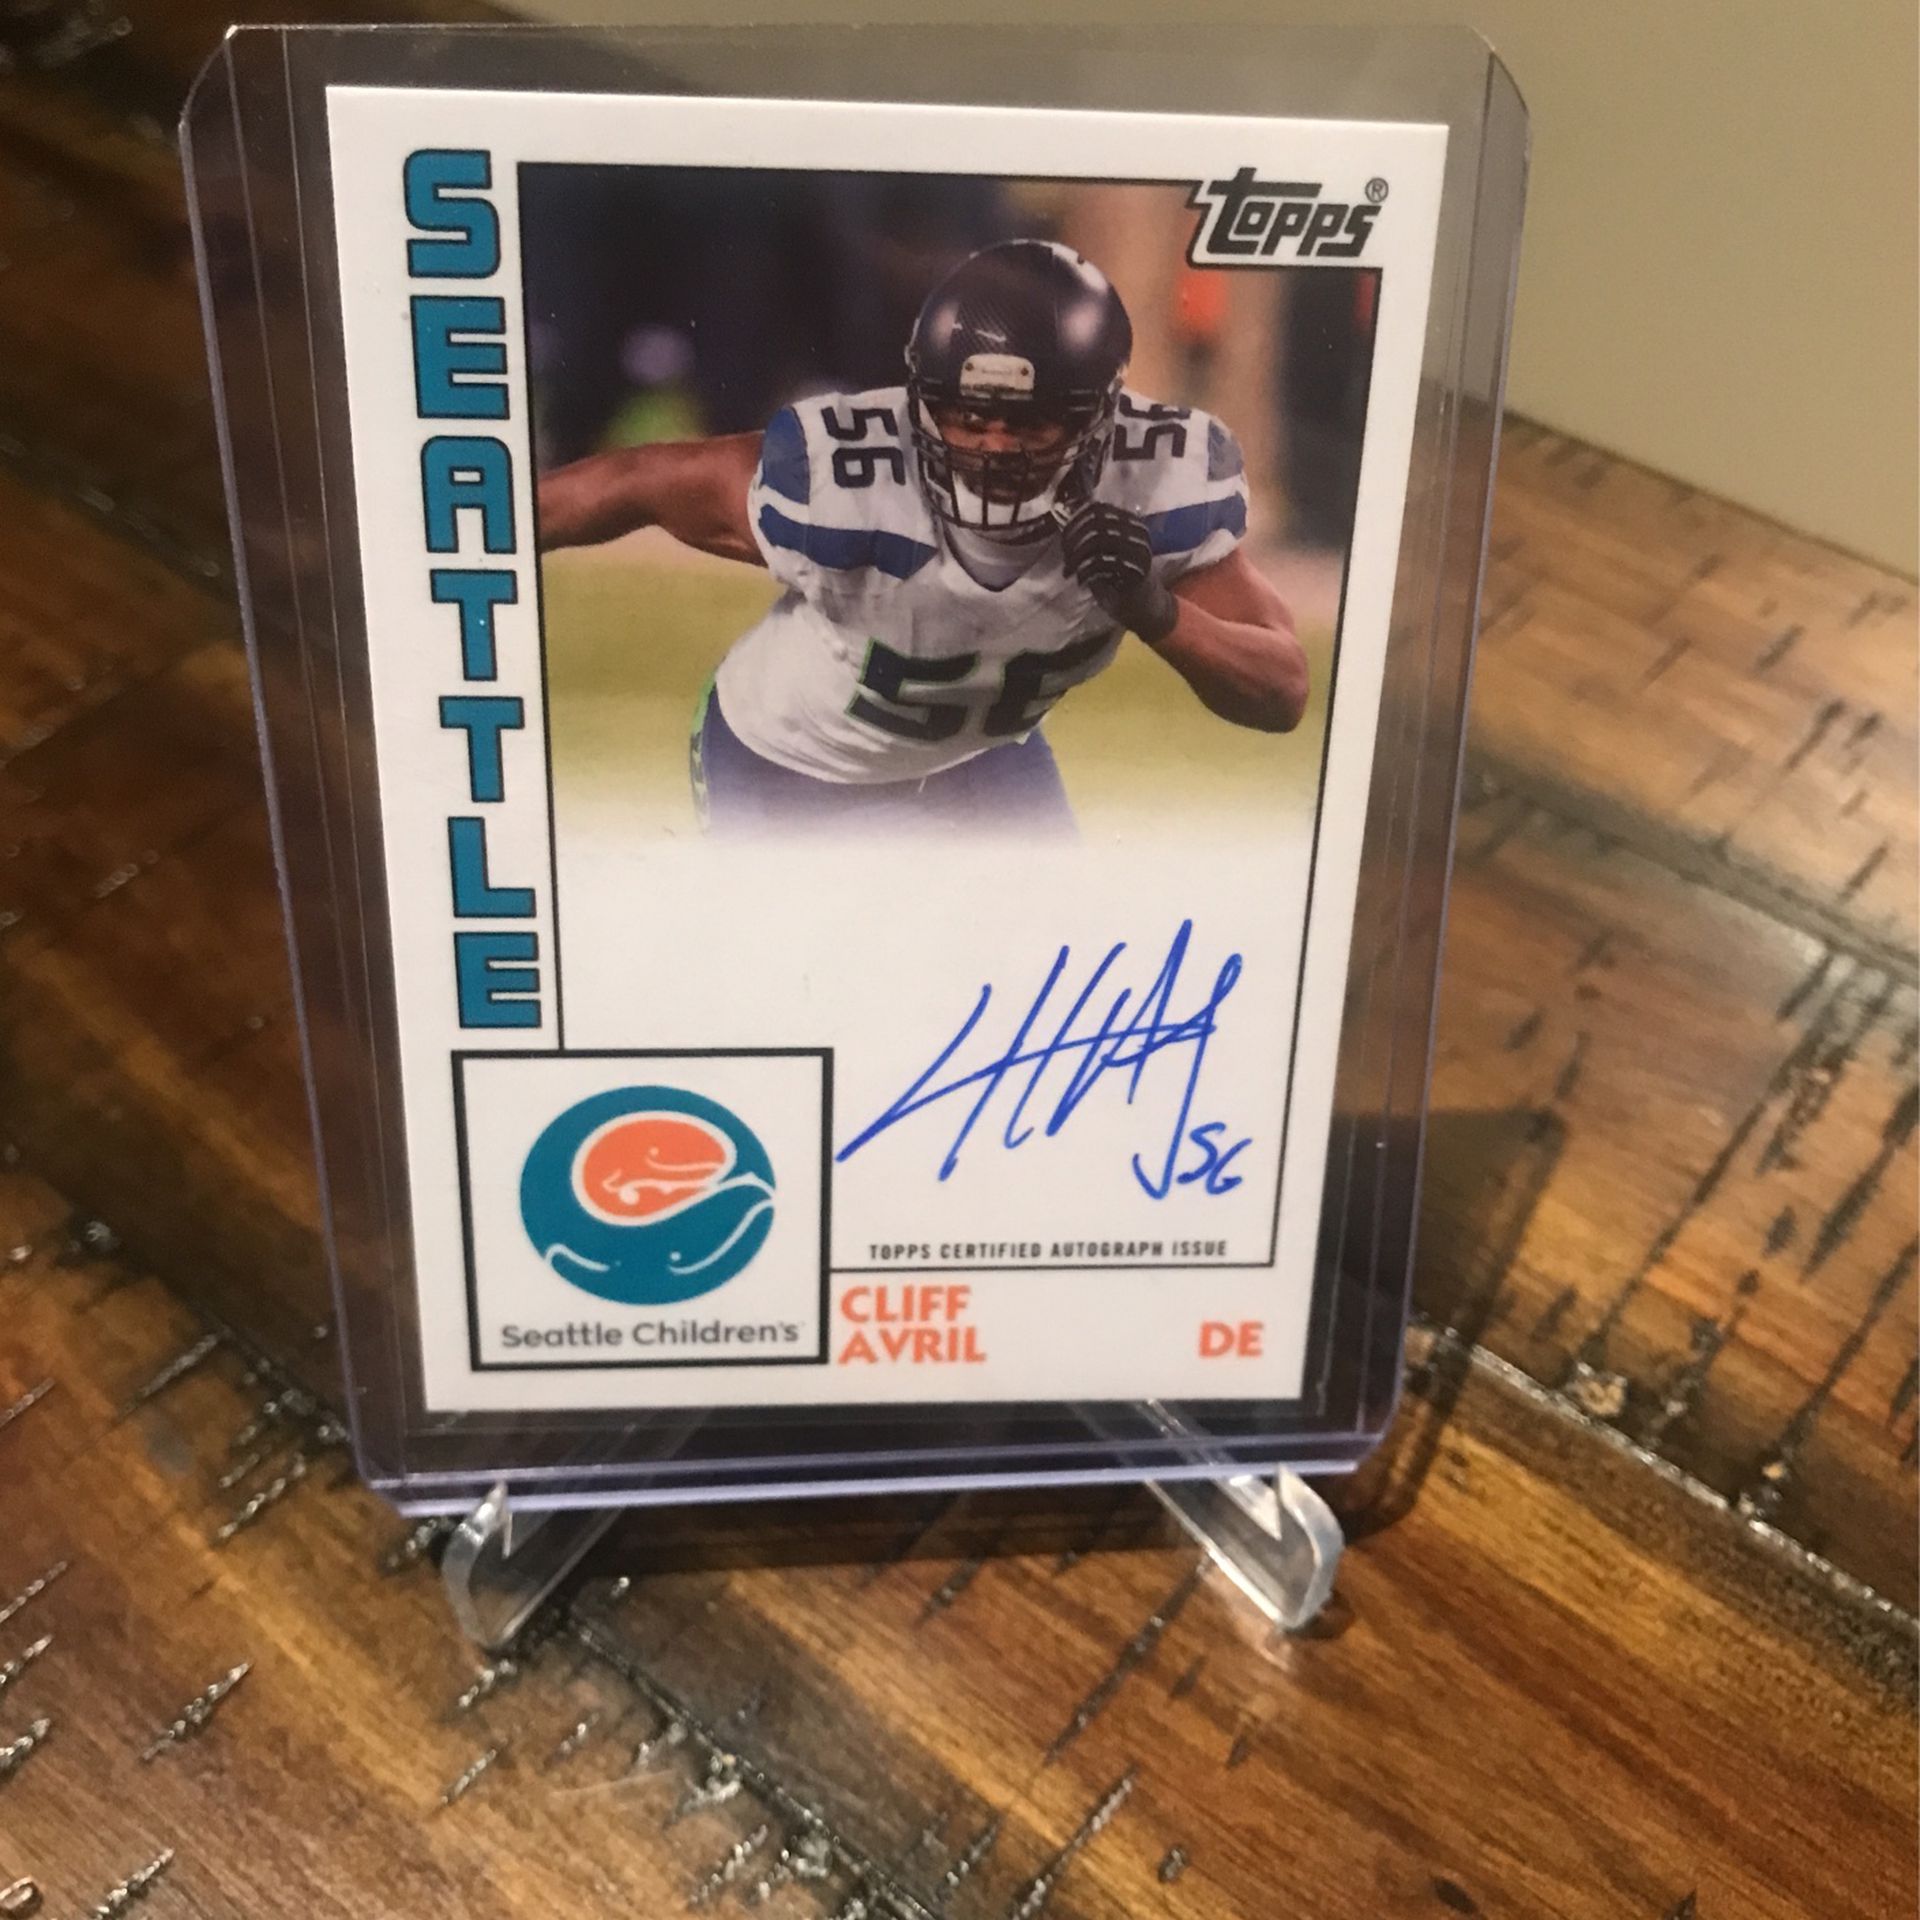 Cliff Avril Signed Topps Autographed Card